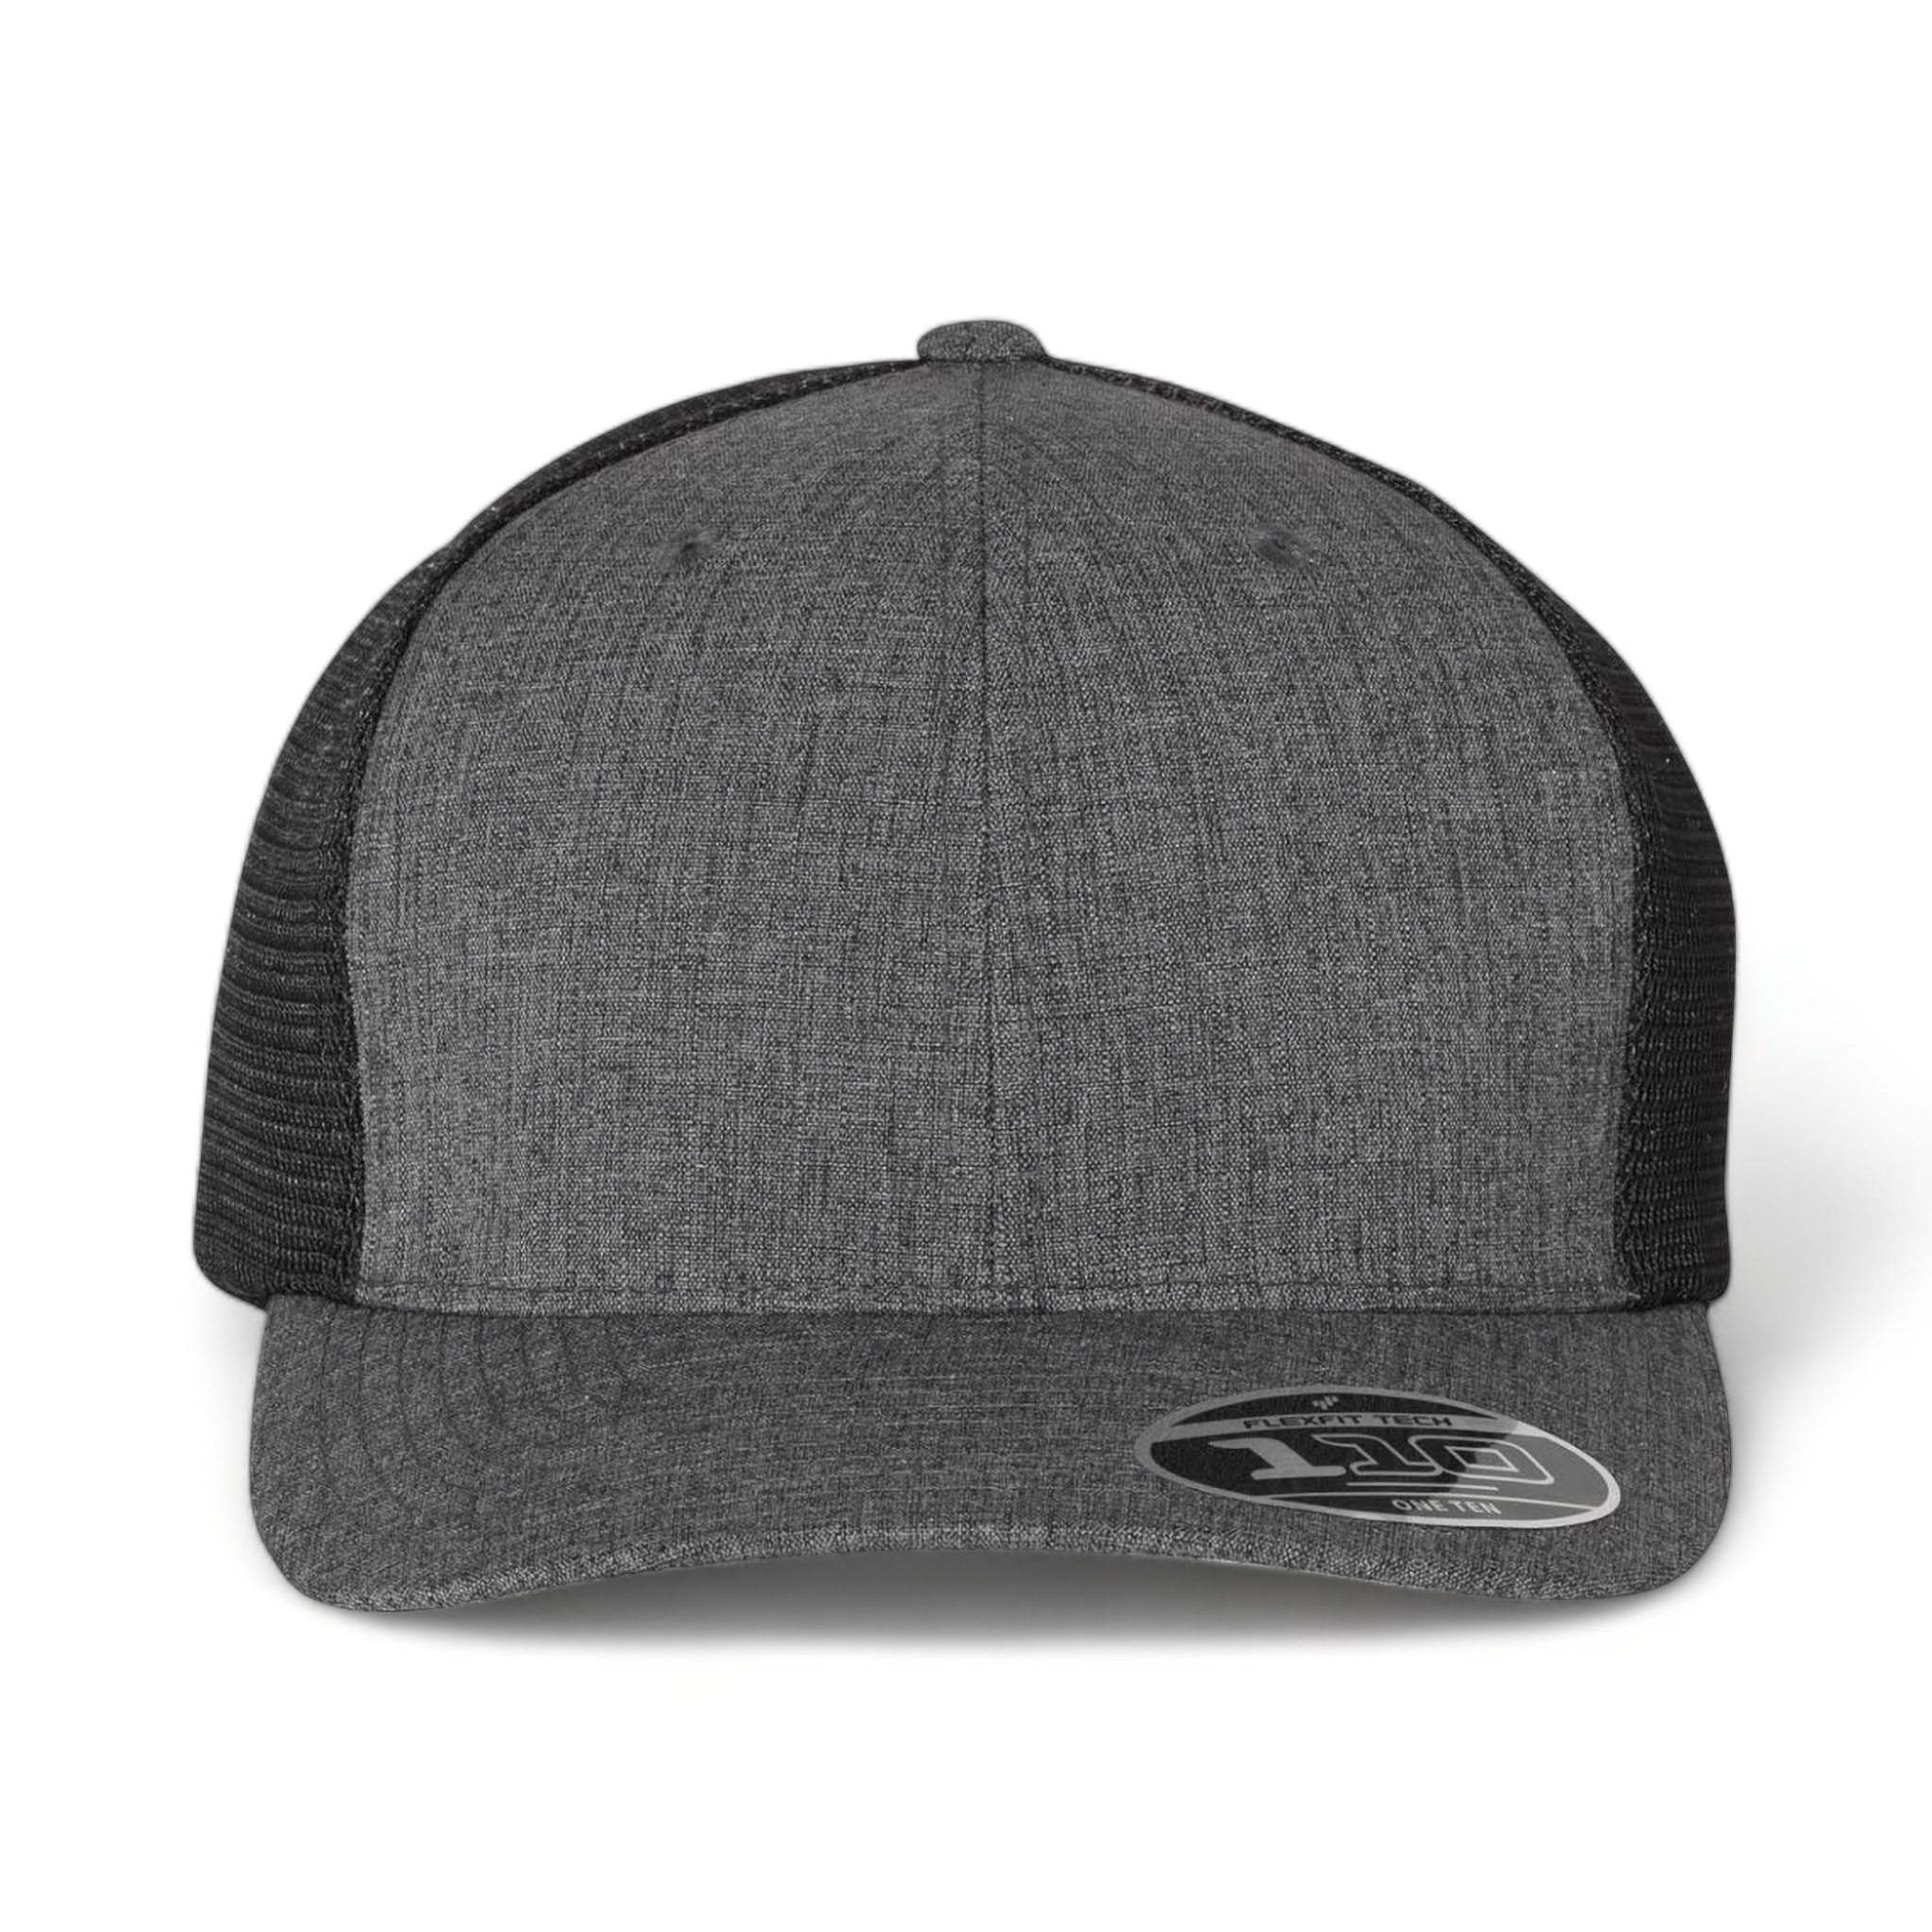 Front view of Flexfit 110M custom hat in melange charcoal and black